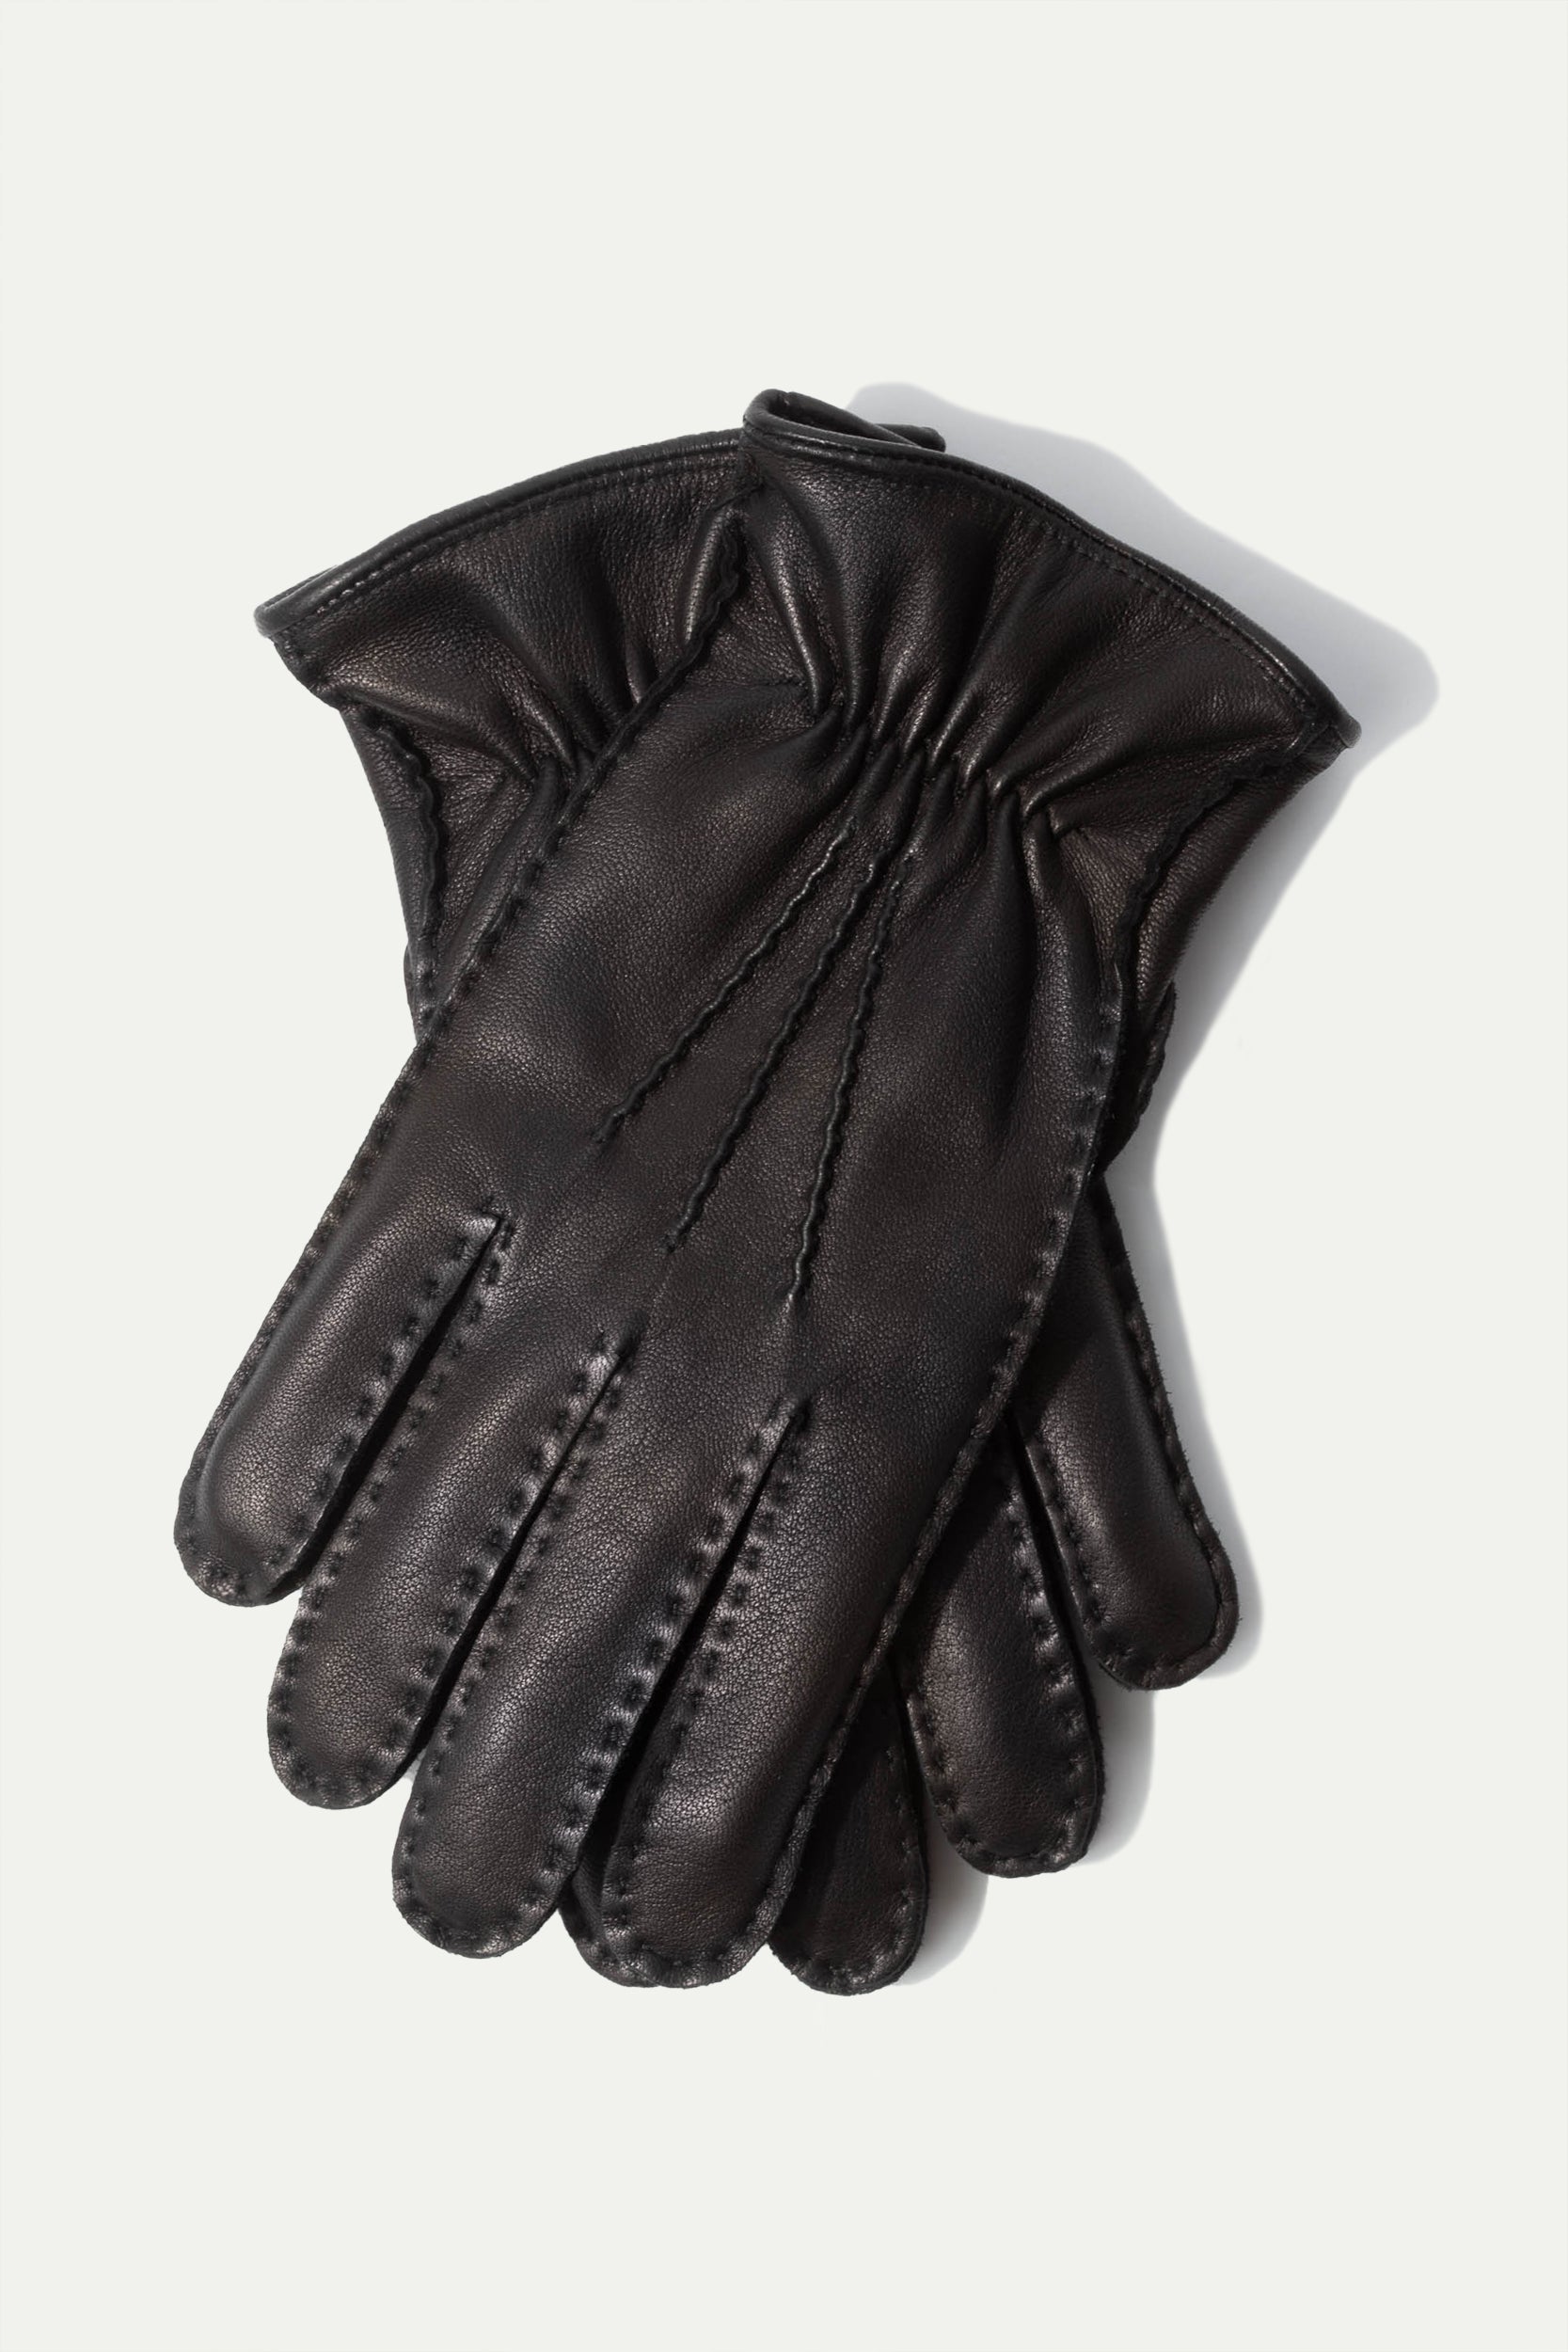 Black Cashmere Lined Deerskin Leather Gloves - Made in Italy